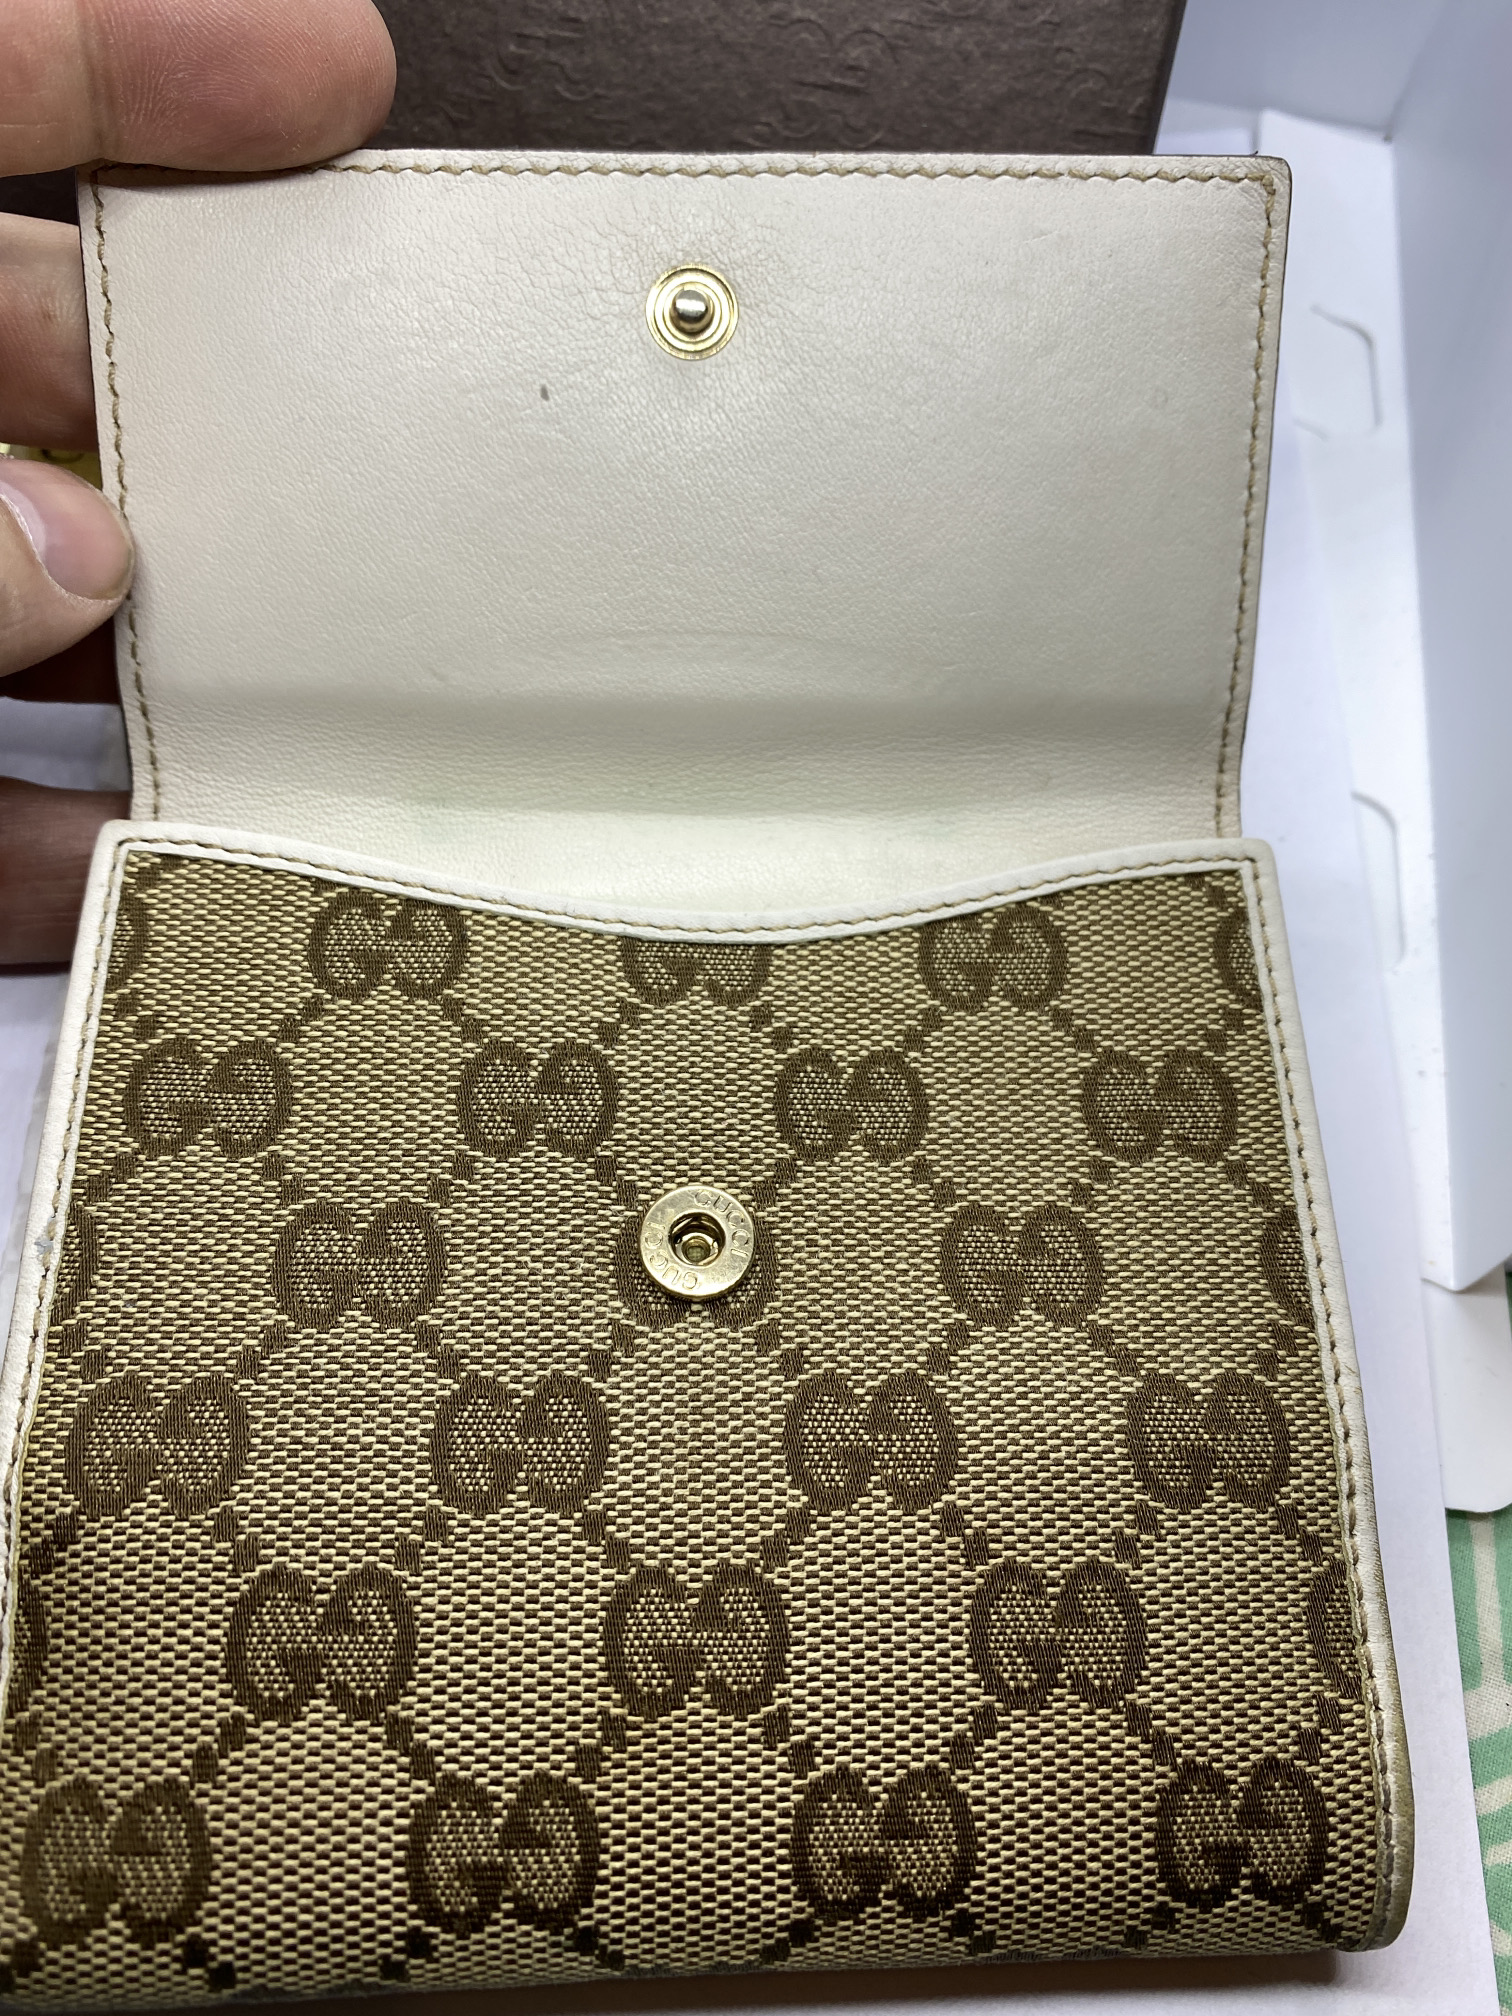 VINTAGE GUCCI GG LOGO HEART PURSE WITH BOX ETC - Image 4 of 7